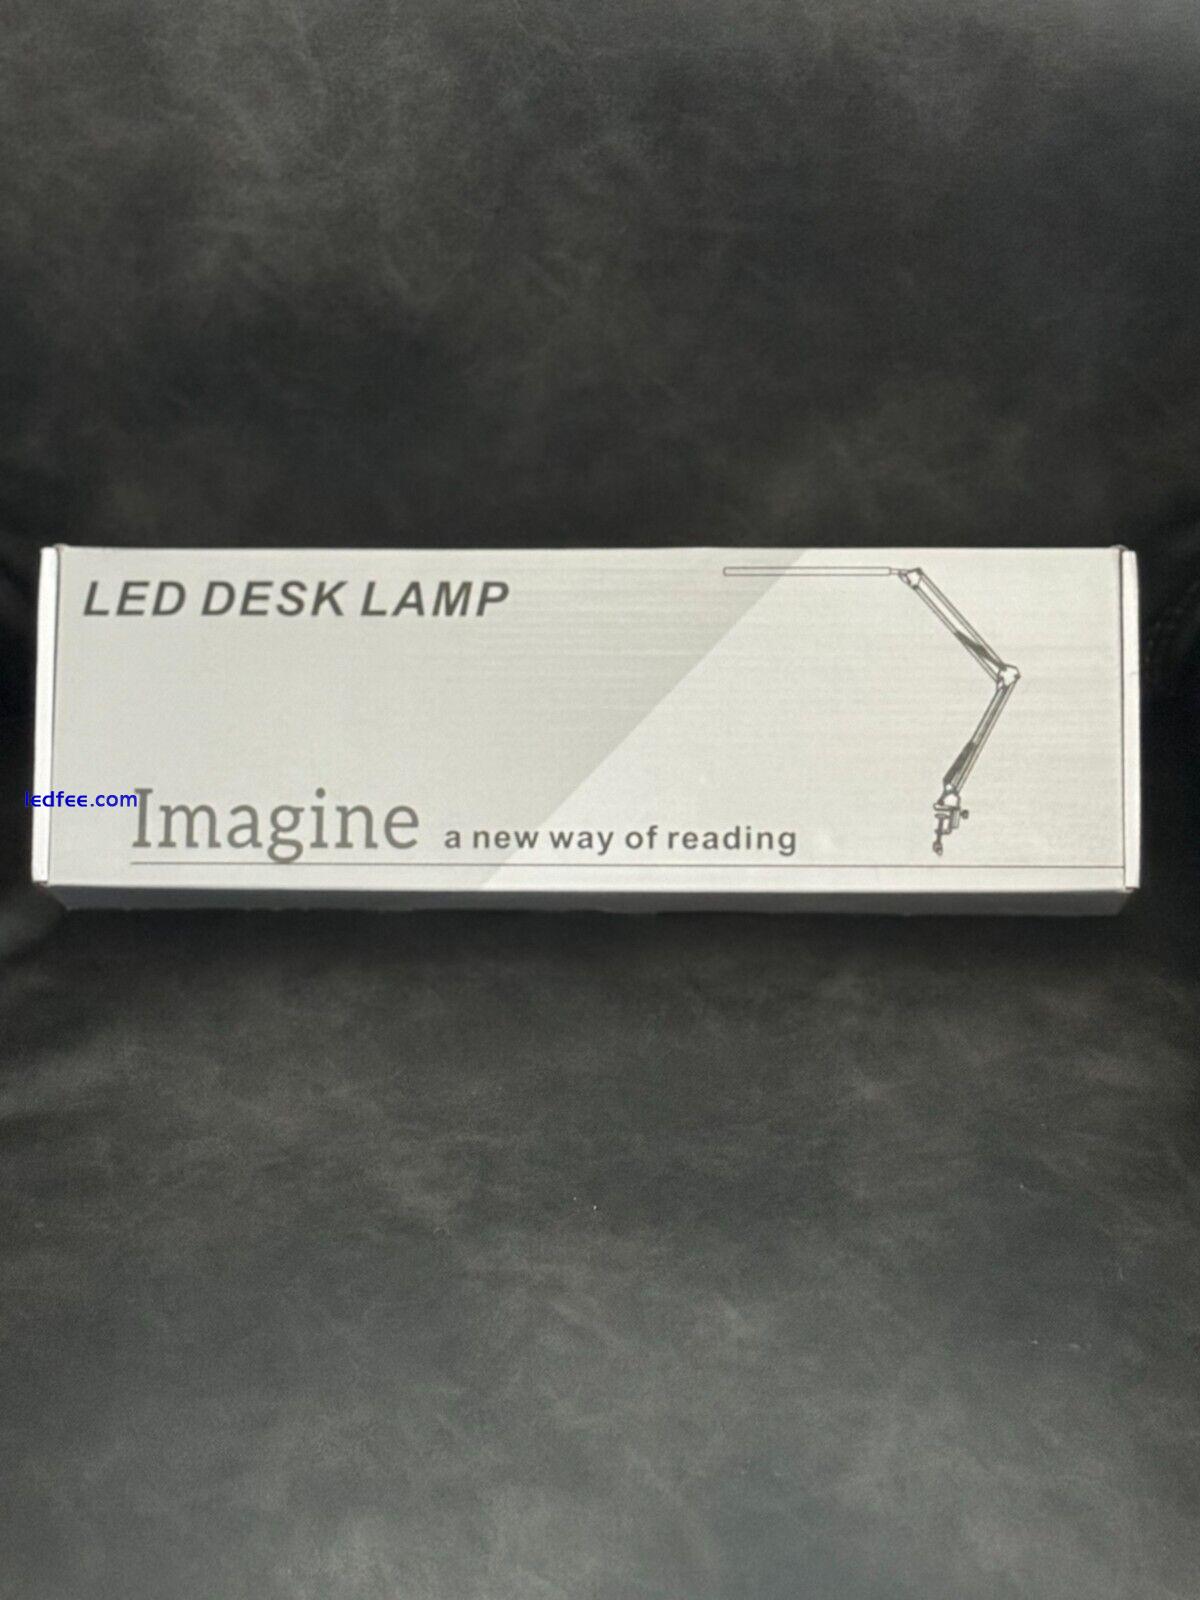 HaFundy LED Desk Lamp for Home/Office - NIB - SHIPS FREE!! 4 